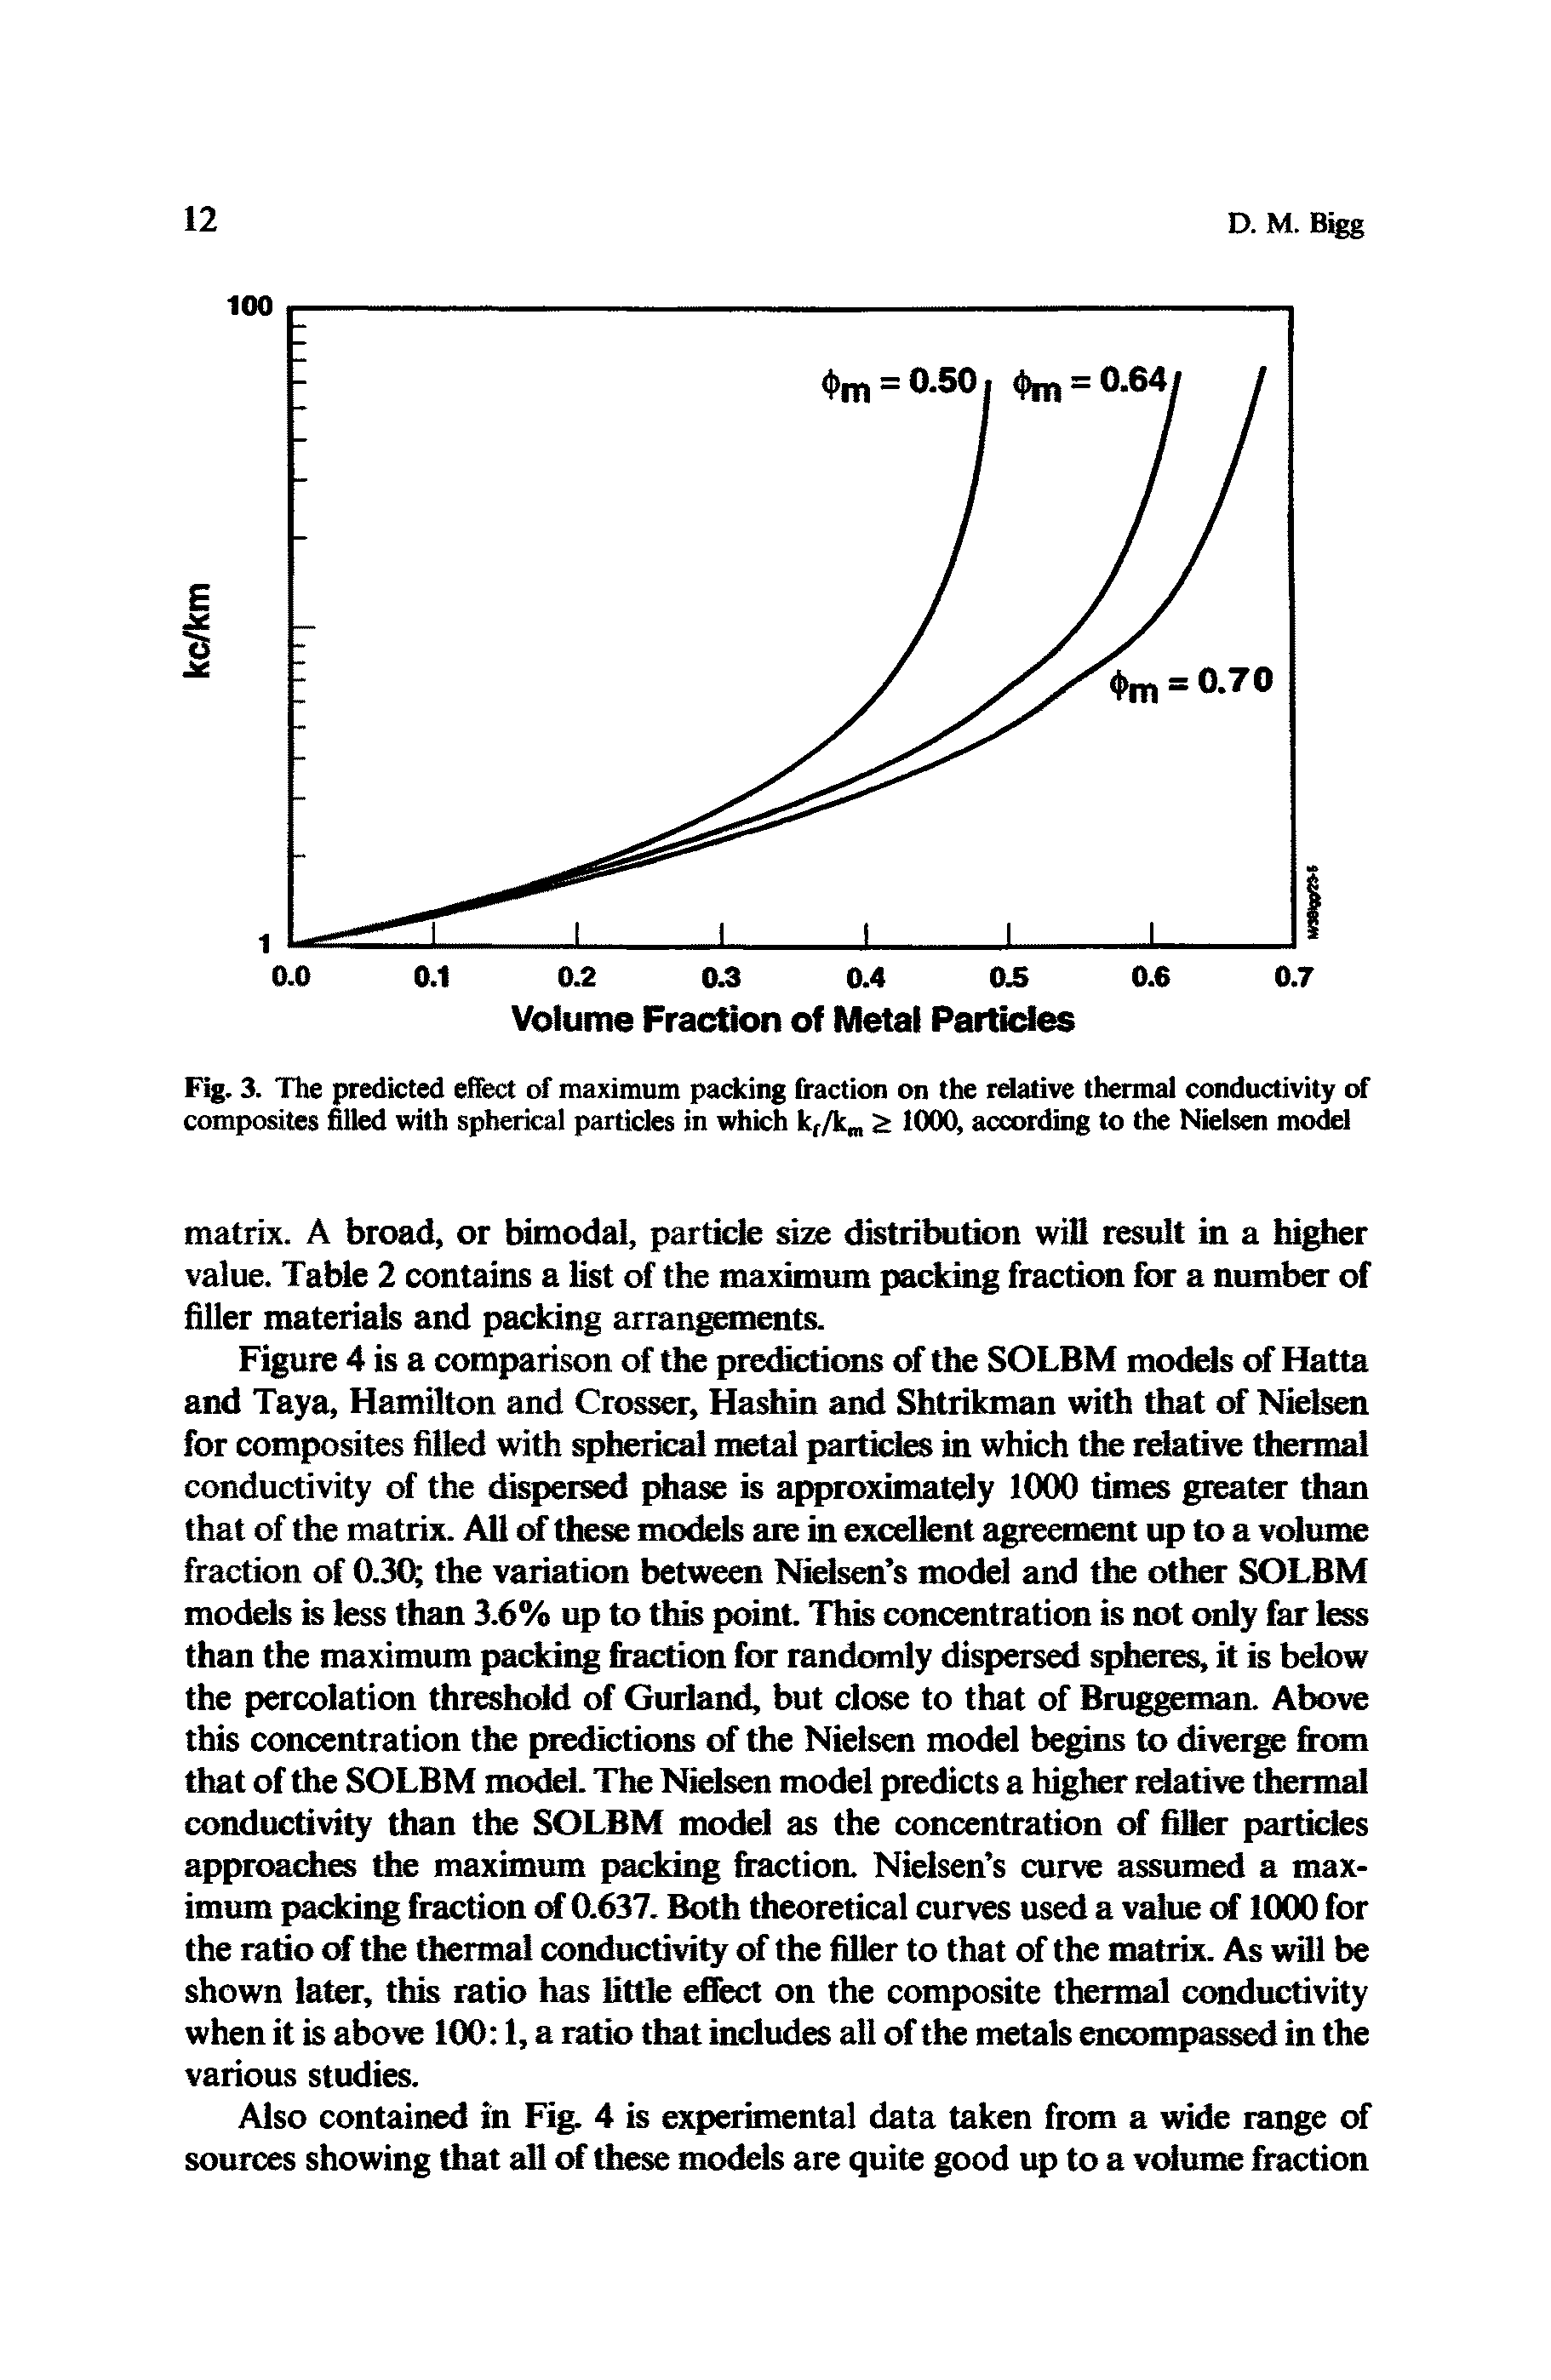 Fig. 3. The predicted effect of maximum packing fraction on the relative thermal conductivity of composites filled with spherical particles in which kf/k 1000, according to the Nielsen model...